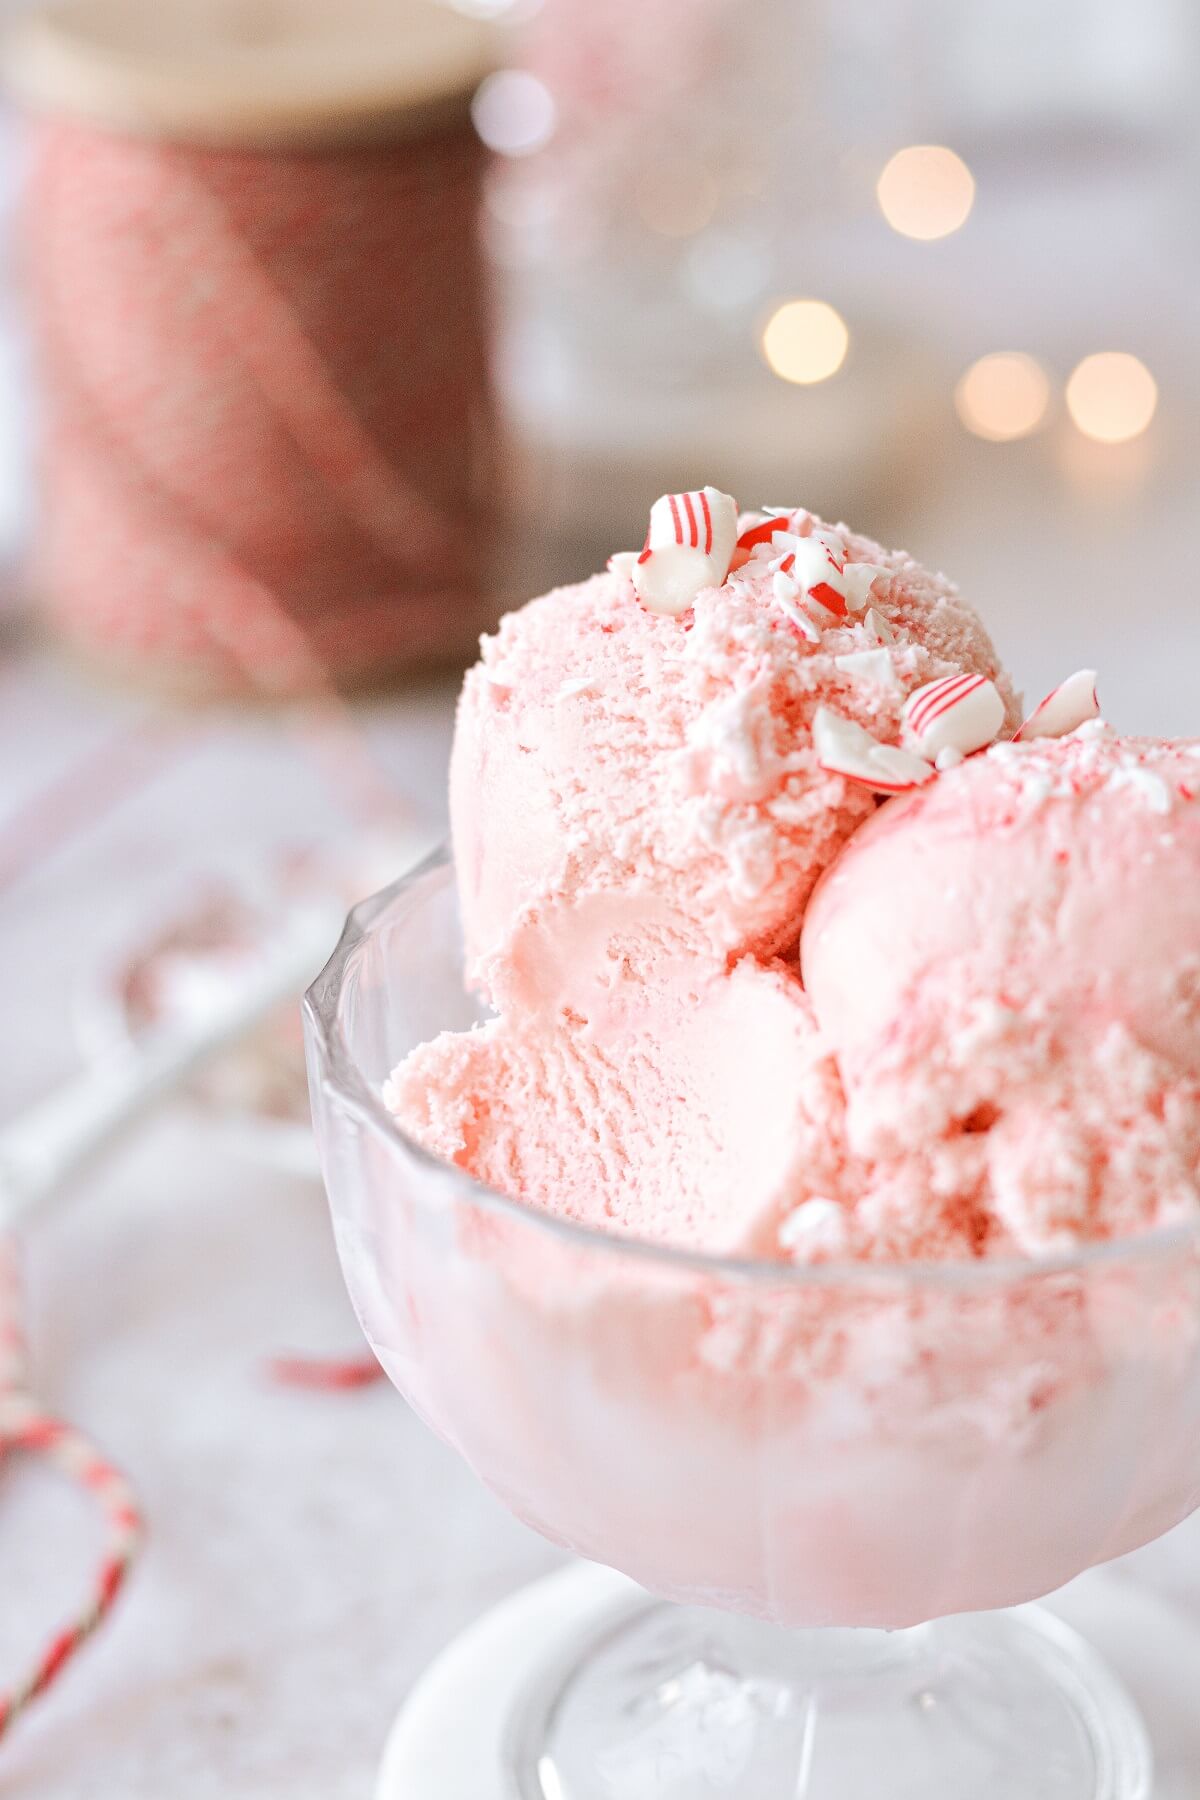 A glass dish of peppermint ice cream with a bite taken.